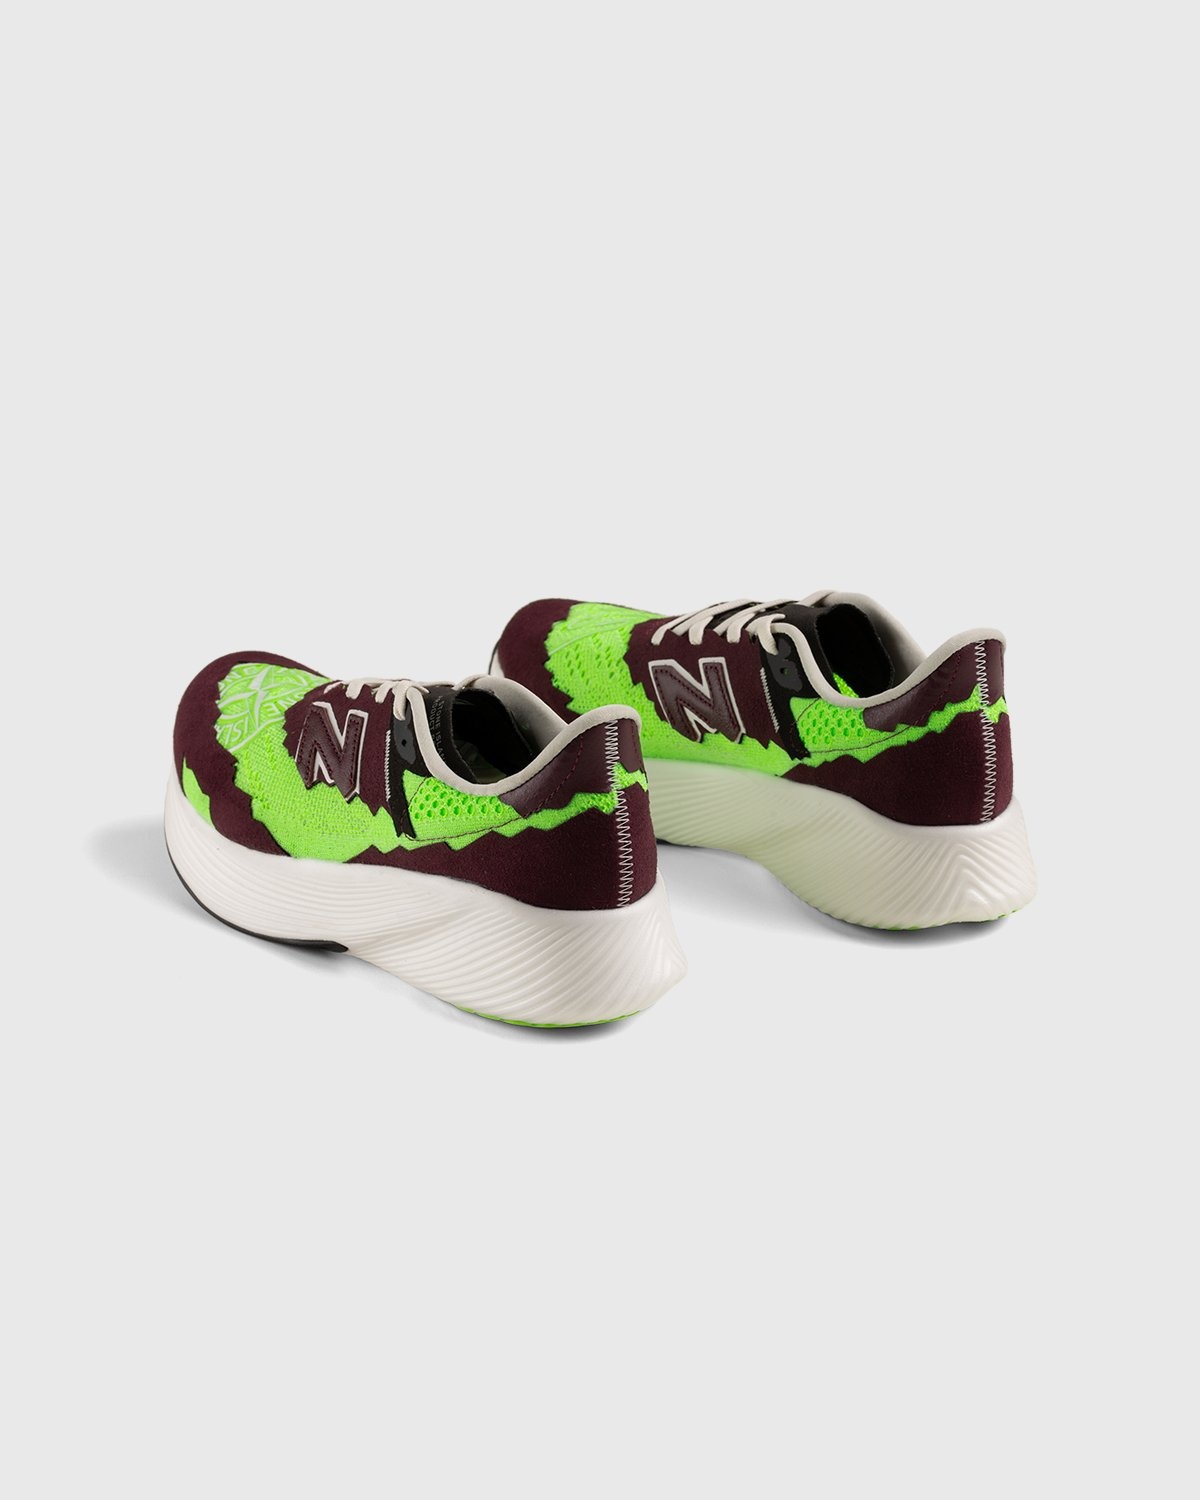 New Balance x Stone Island – FuelCell RC Elite v2 Energy Lime - Low Top Sneakers - Green - Image 3